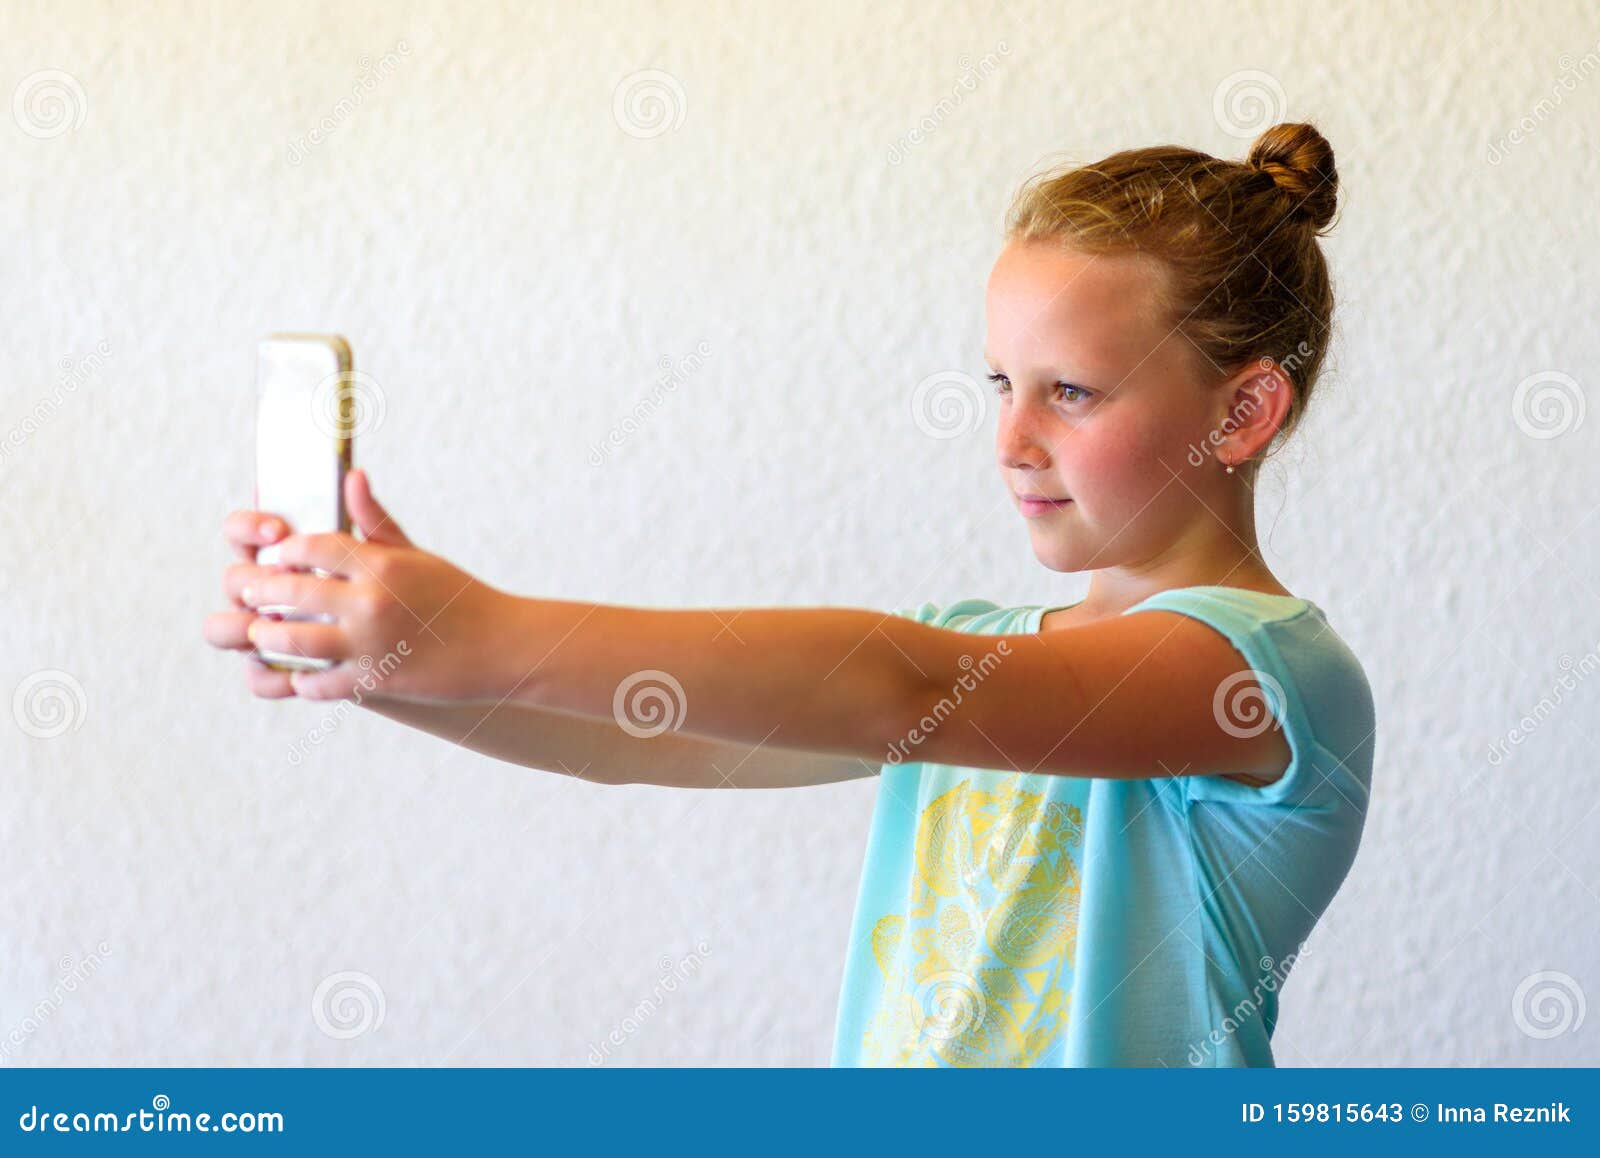 Teen Girl In Bed Using Smartphone High-Res Stock Photo 